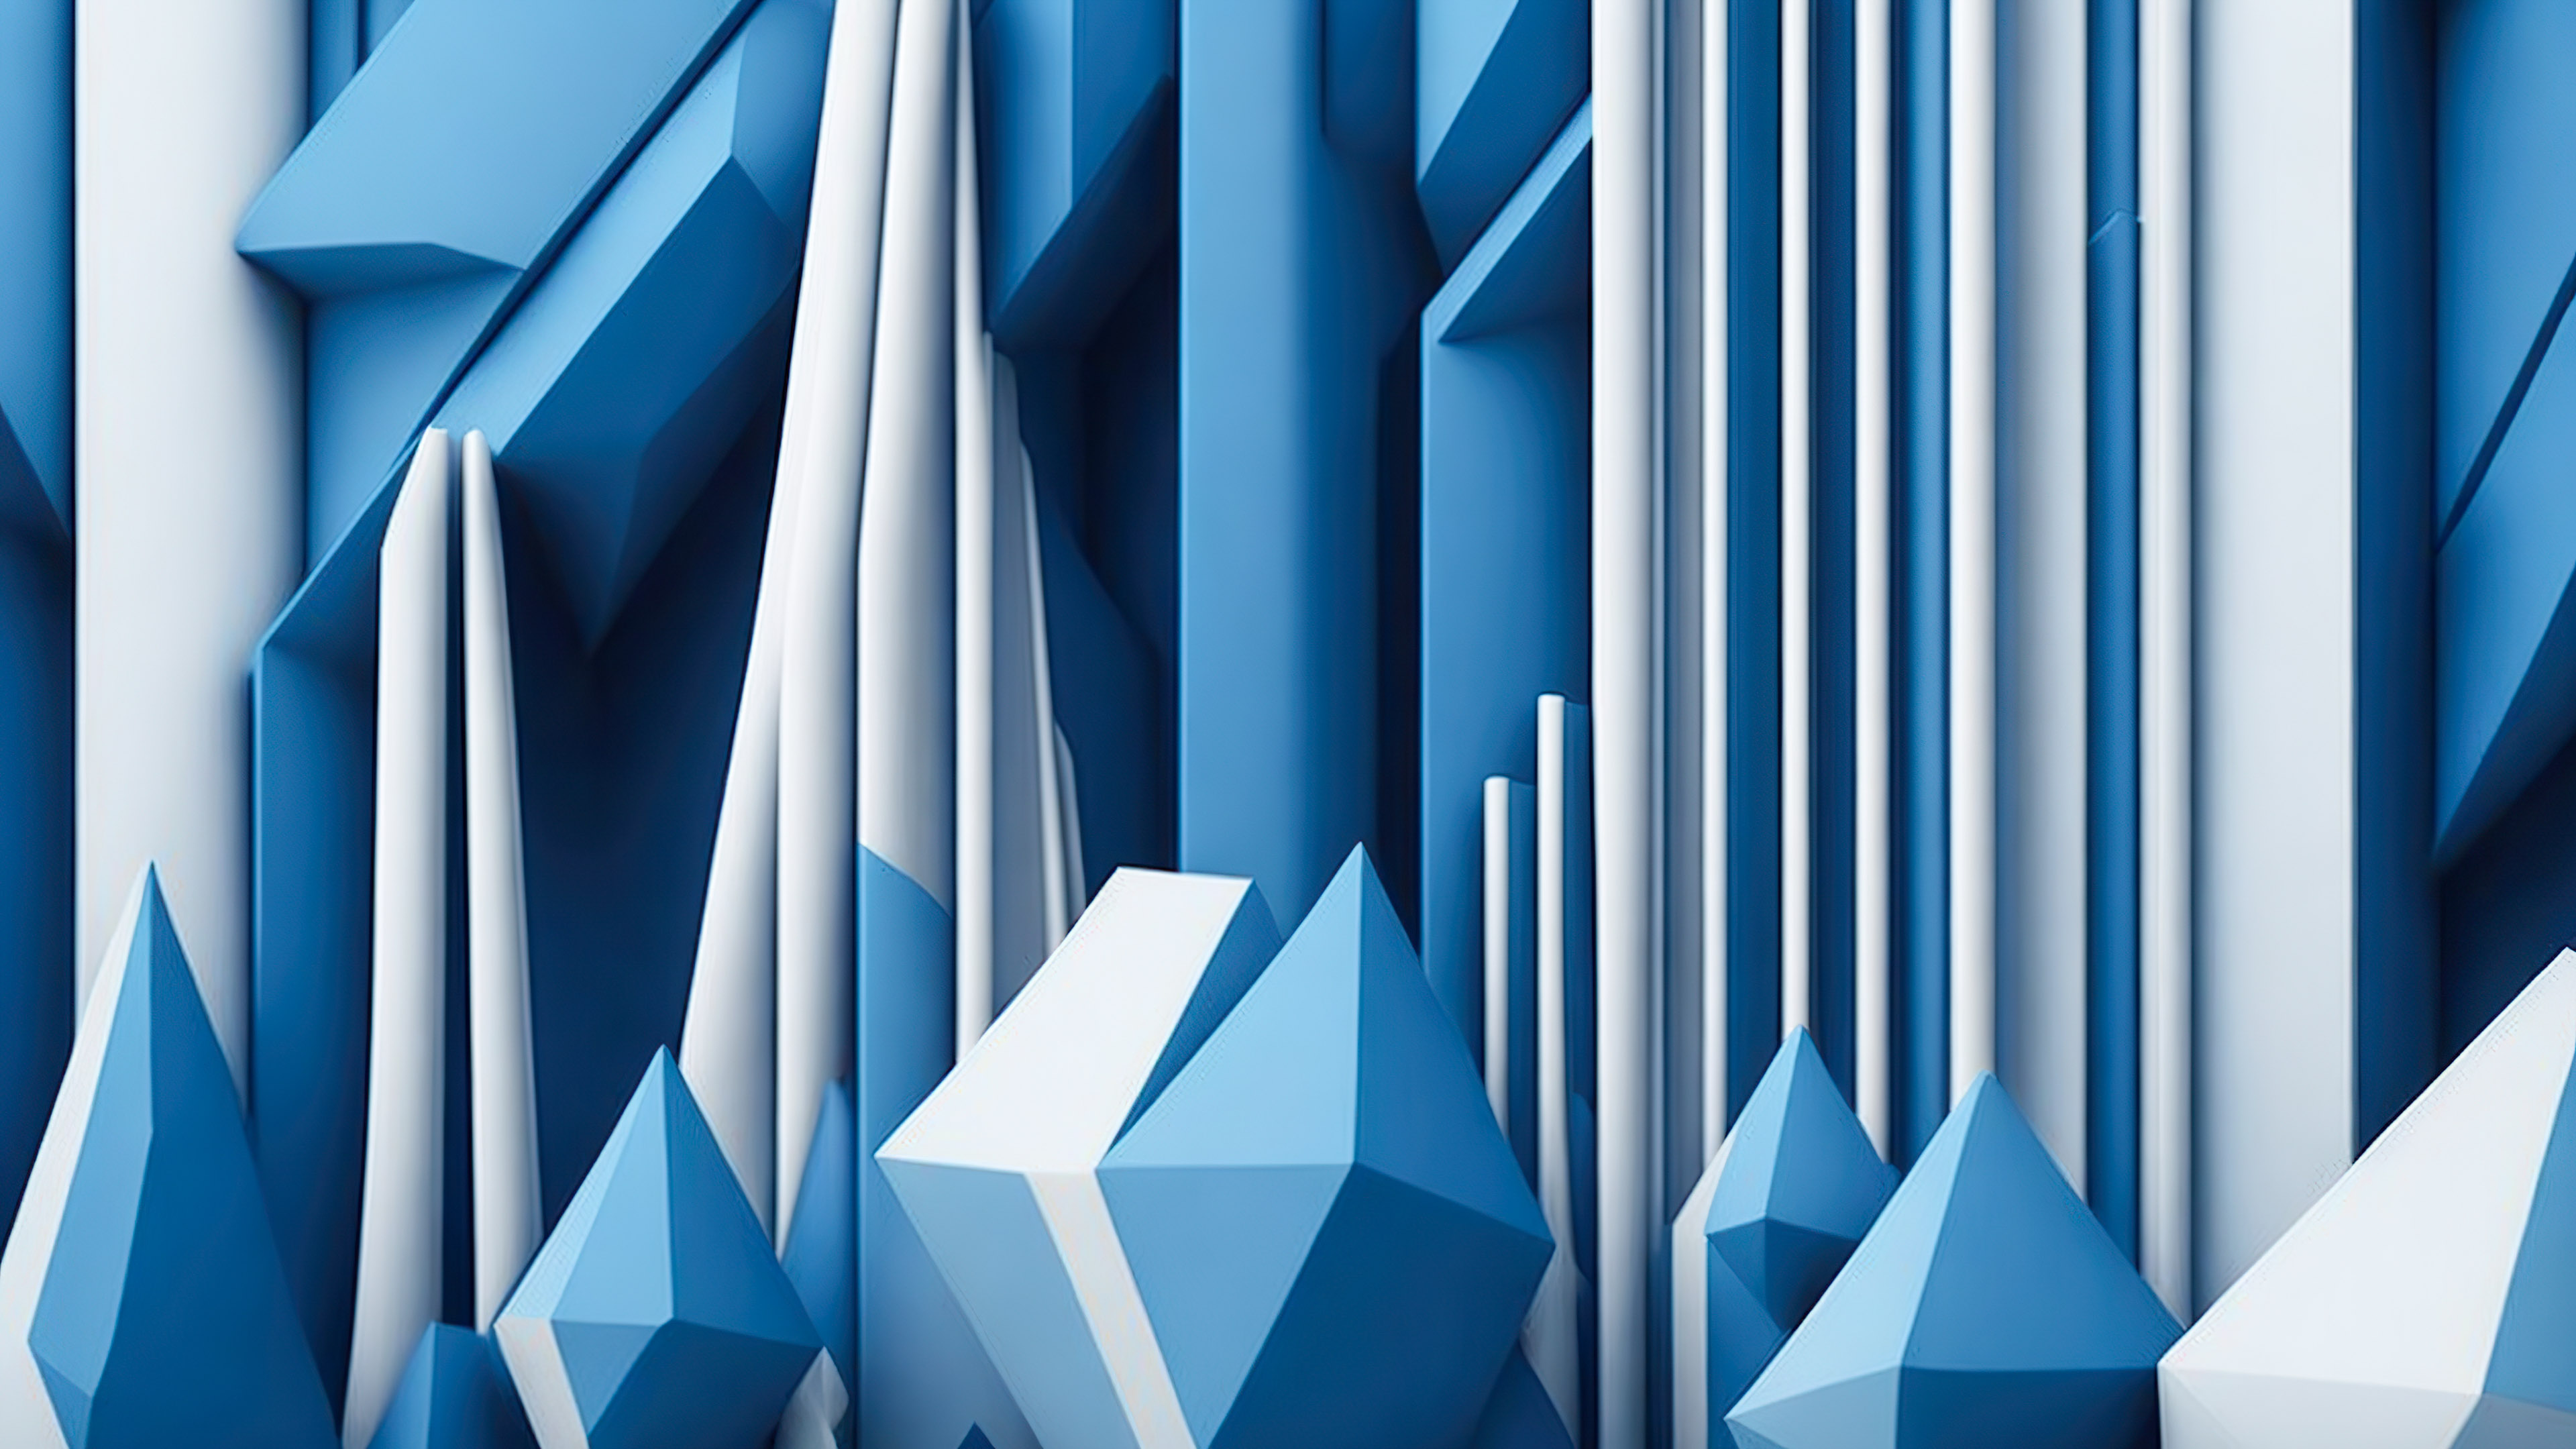 Elevate your desktop aesthetics with an exclusive blue abstract wallpaper, featuring an arrangement of vivid blue poles.